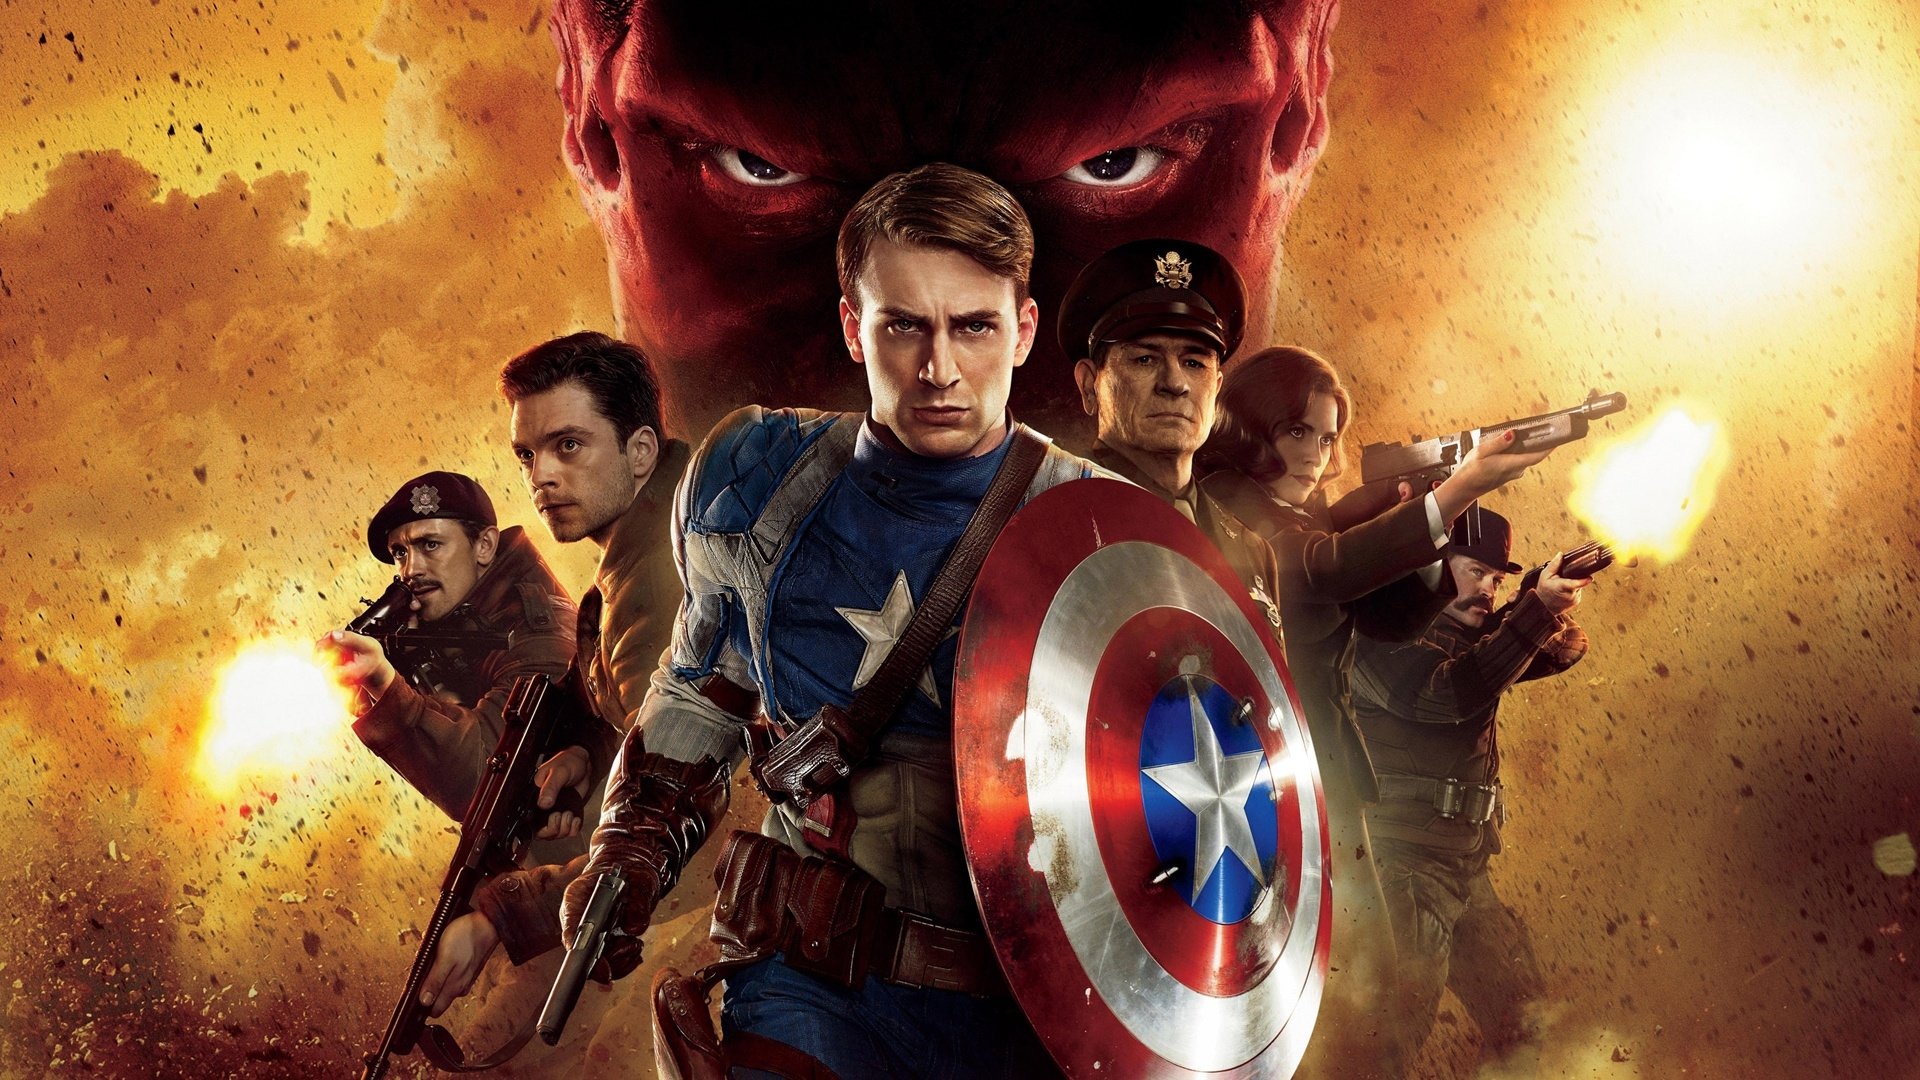 Captain America The First Avenger HD Wallpaper Background Image